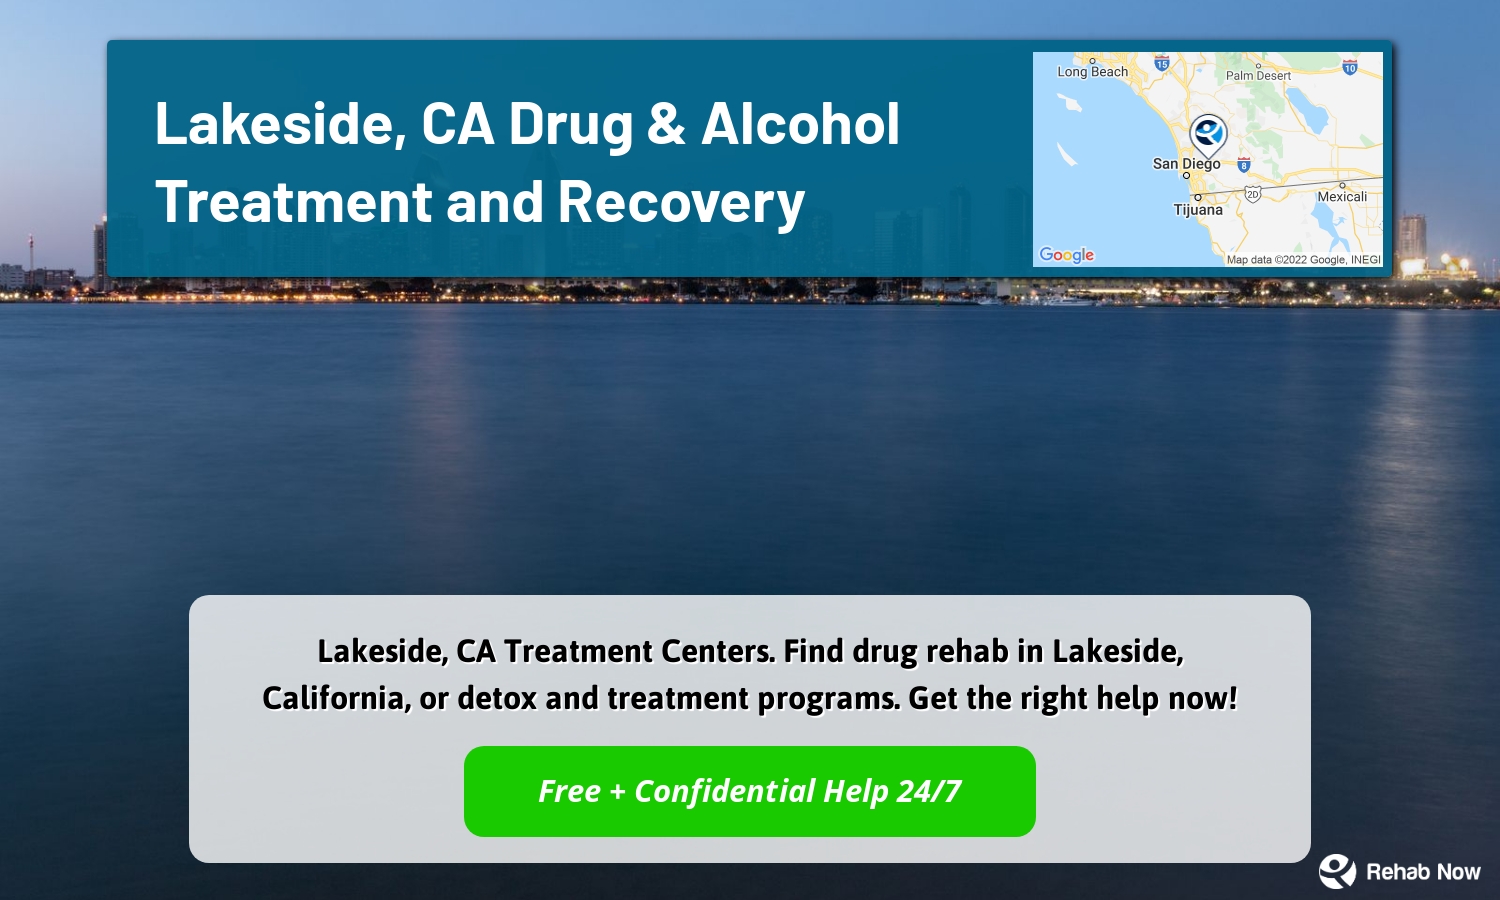 Lakeside, CA Treatment Centers. Find drug rehab in Lakeside, California, or detox and treatment programs. Get the right help now!